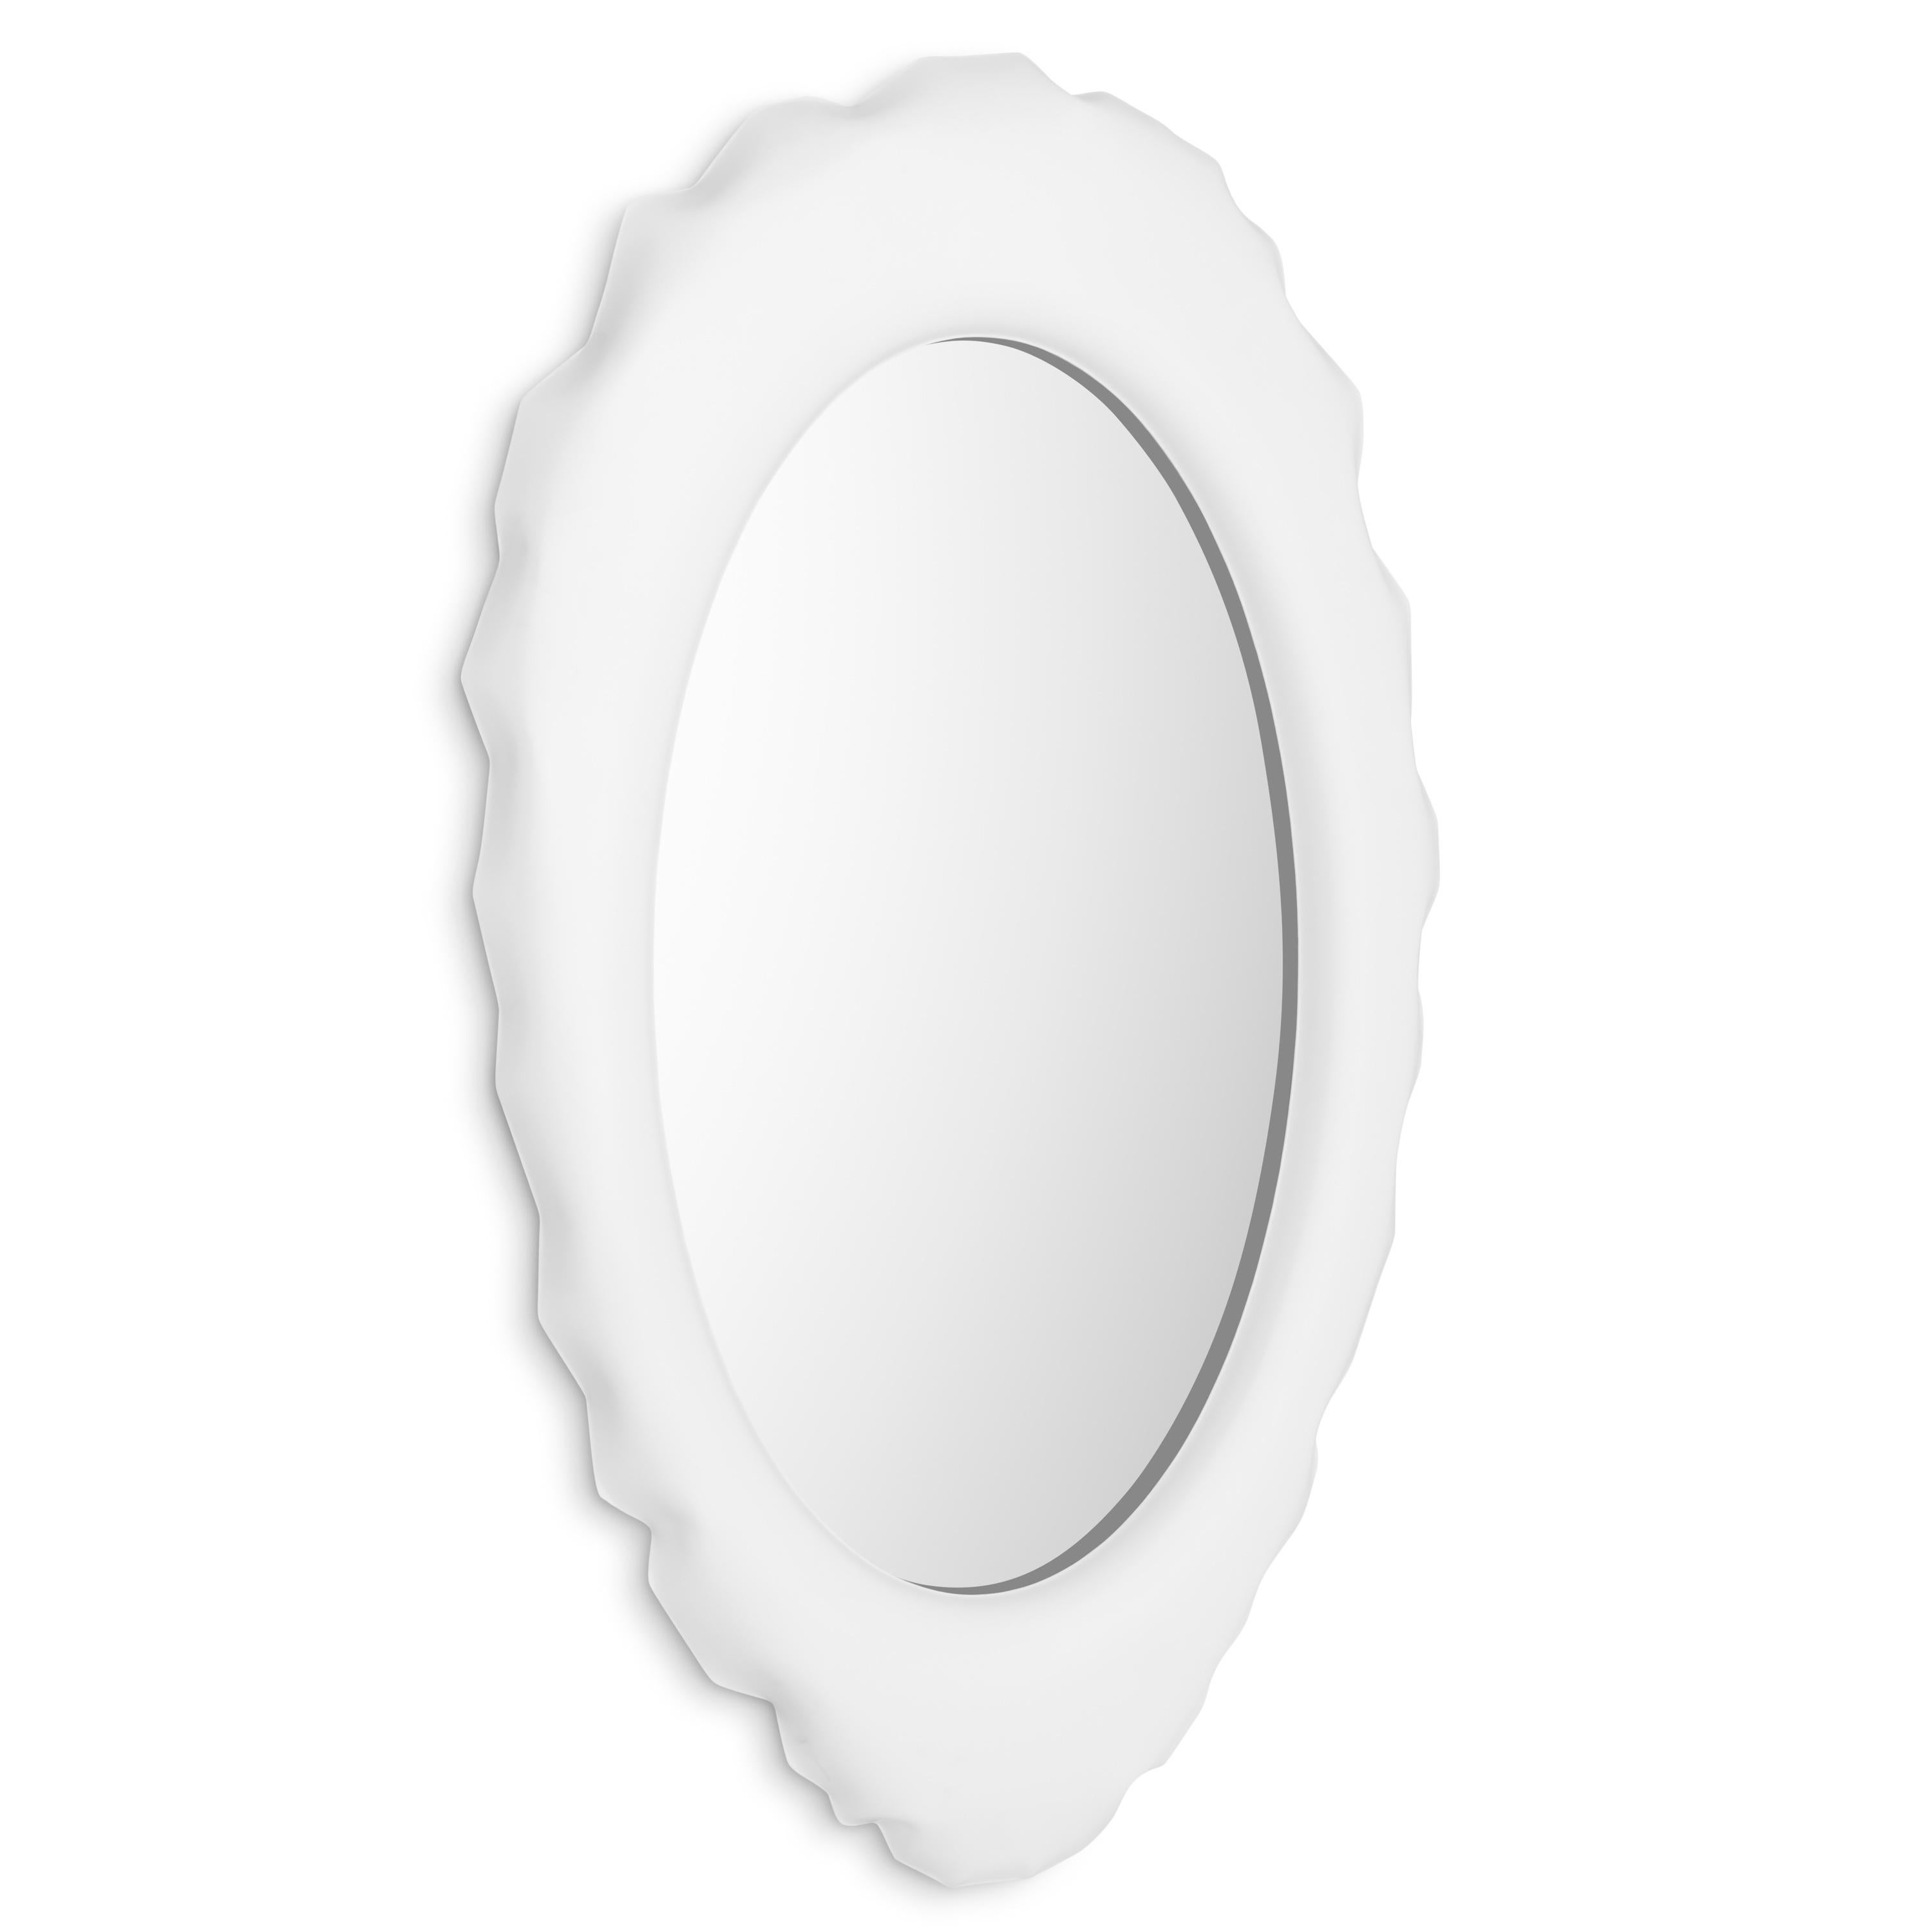 Organic Modern Contemporary Wall Mirror 'Silex' by Zieta, Cotton Candy White For Sale